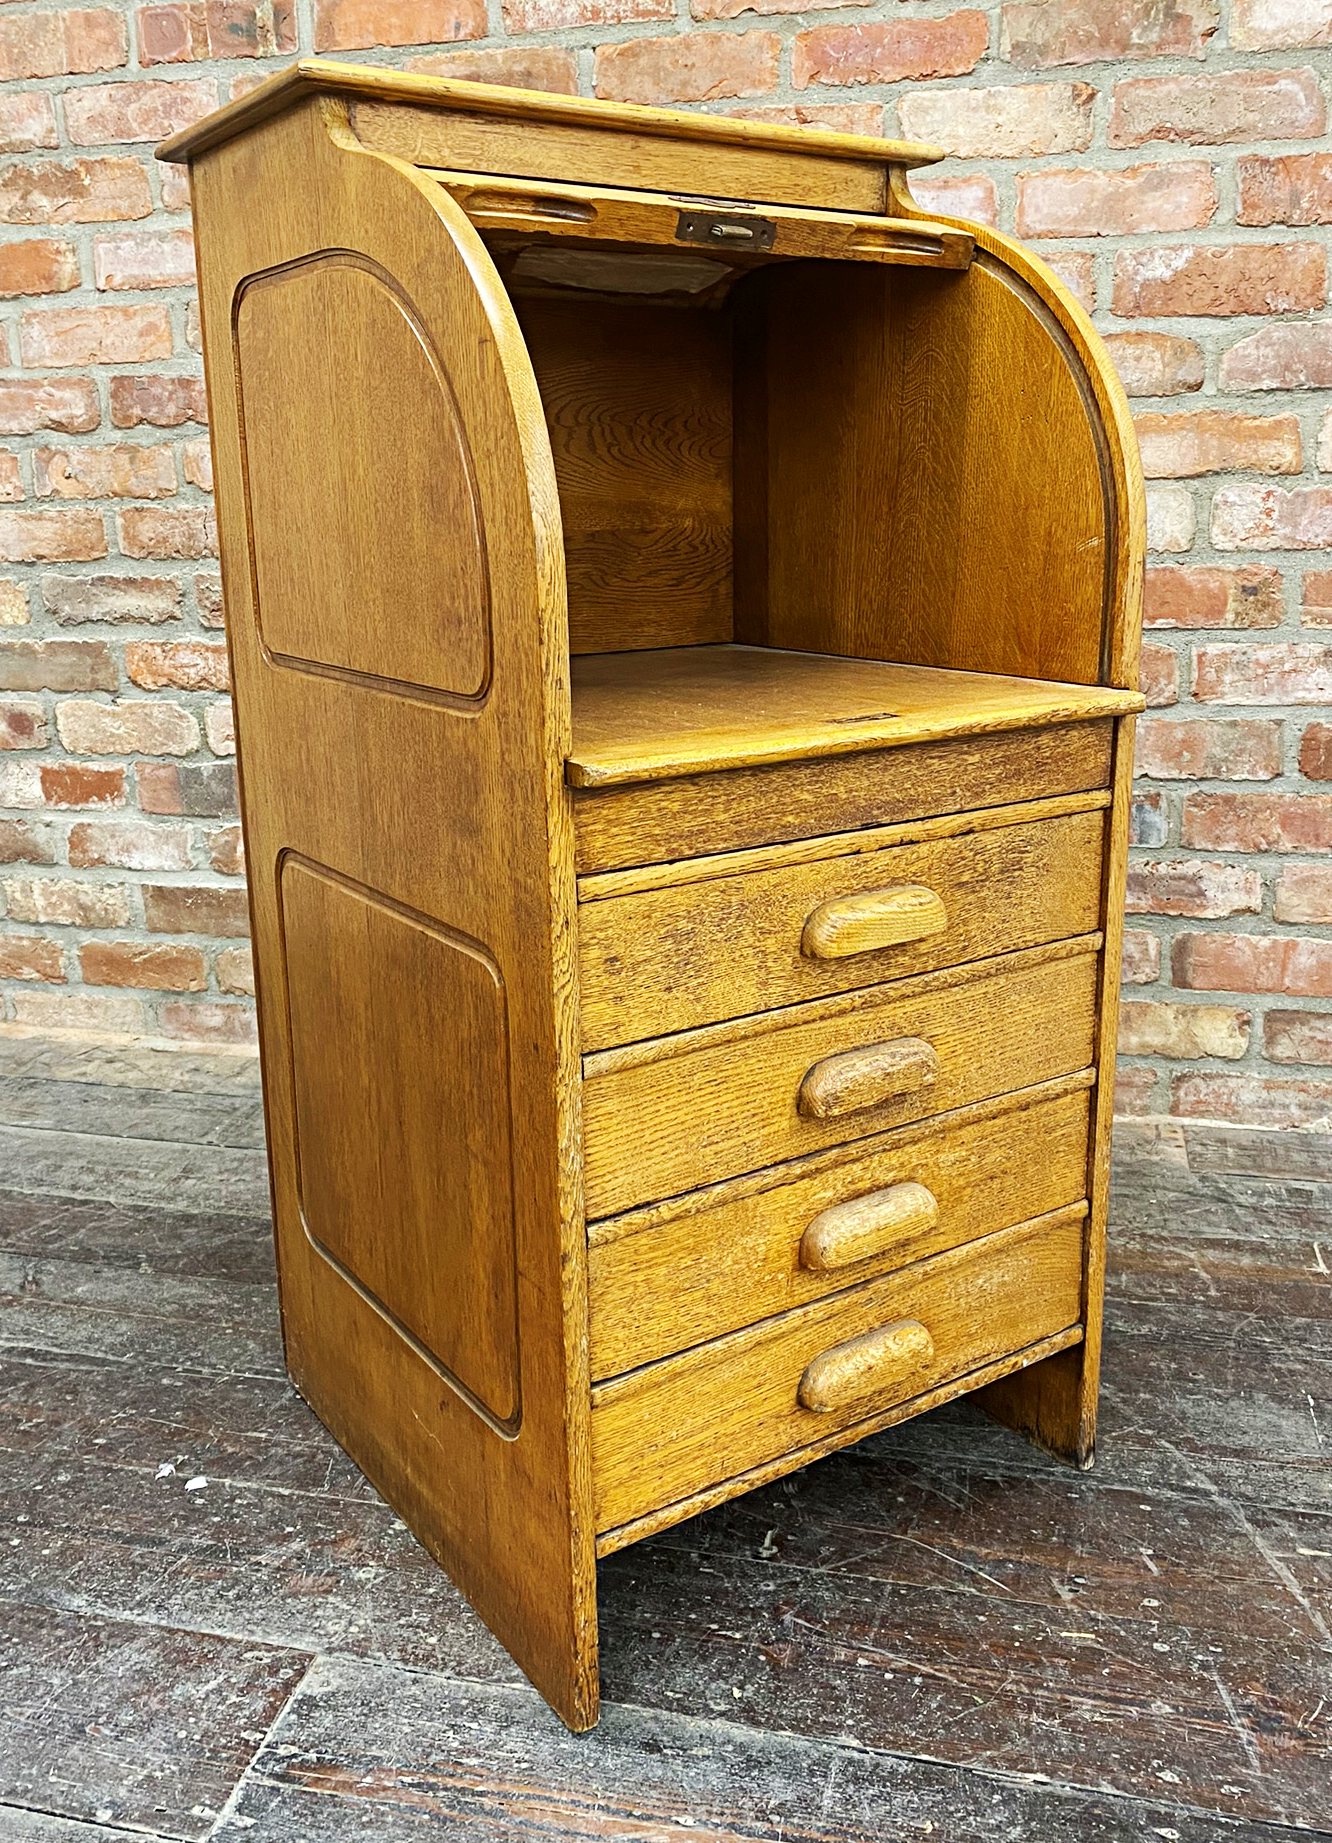 Sweet early 20th century golden oak students bureau, with tambour front, concealed work surface - Image 2 of 3